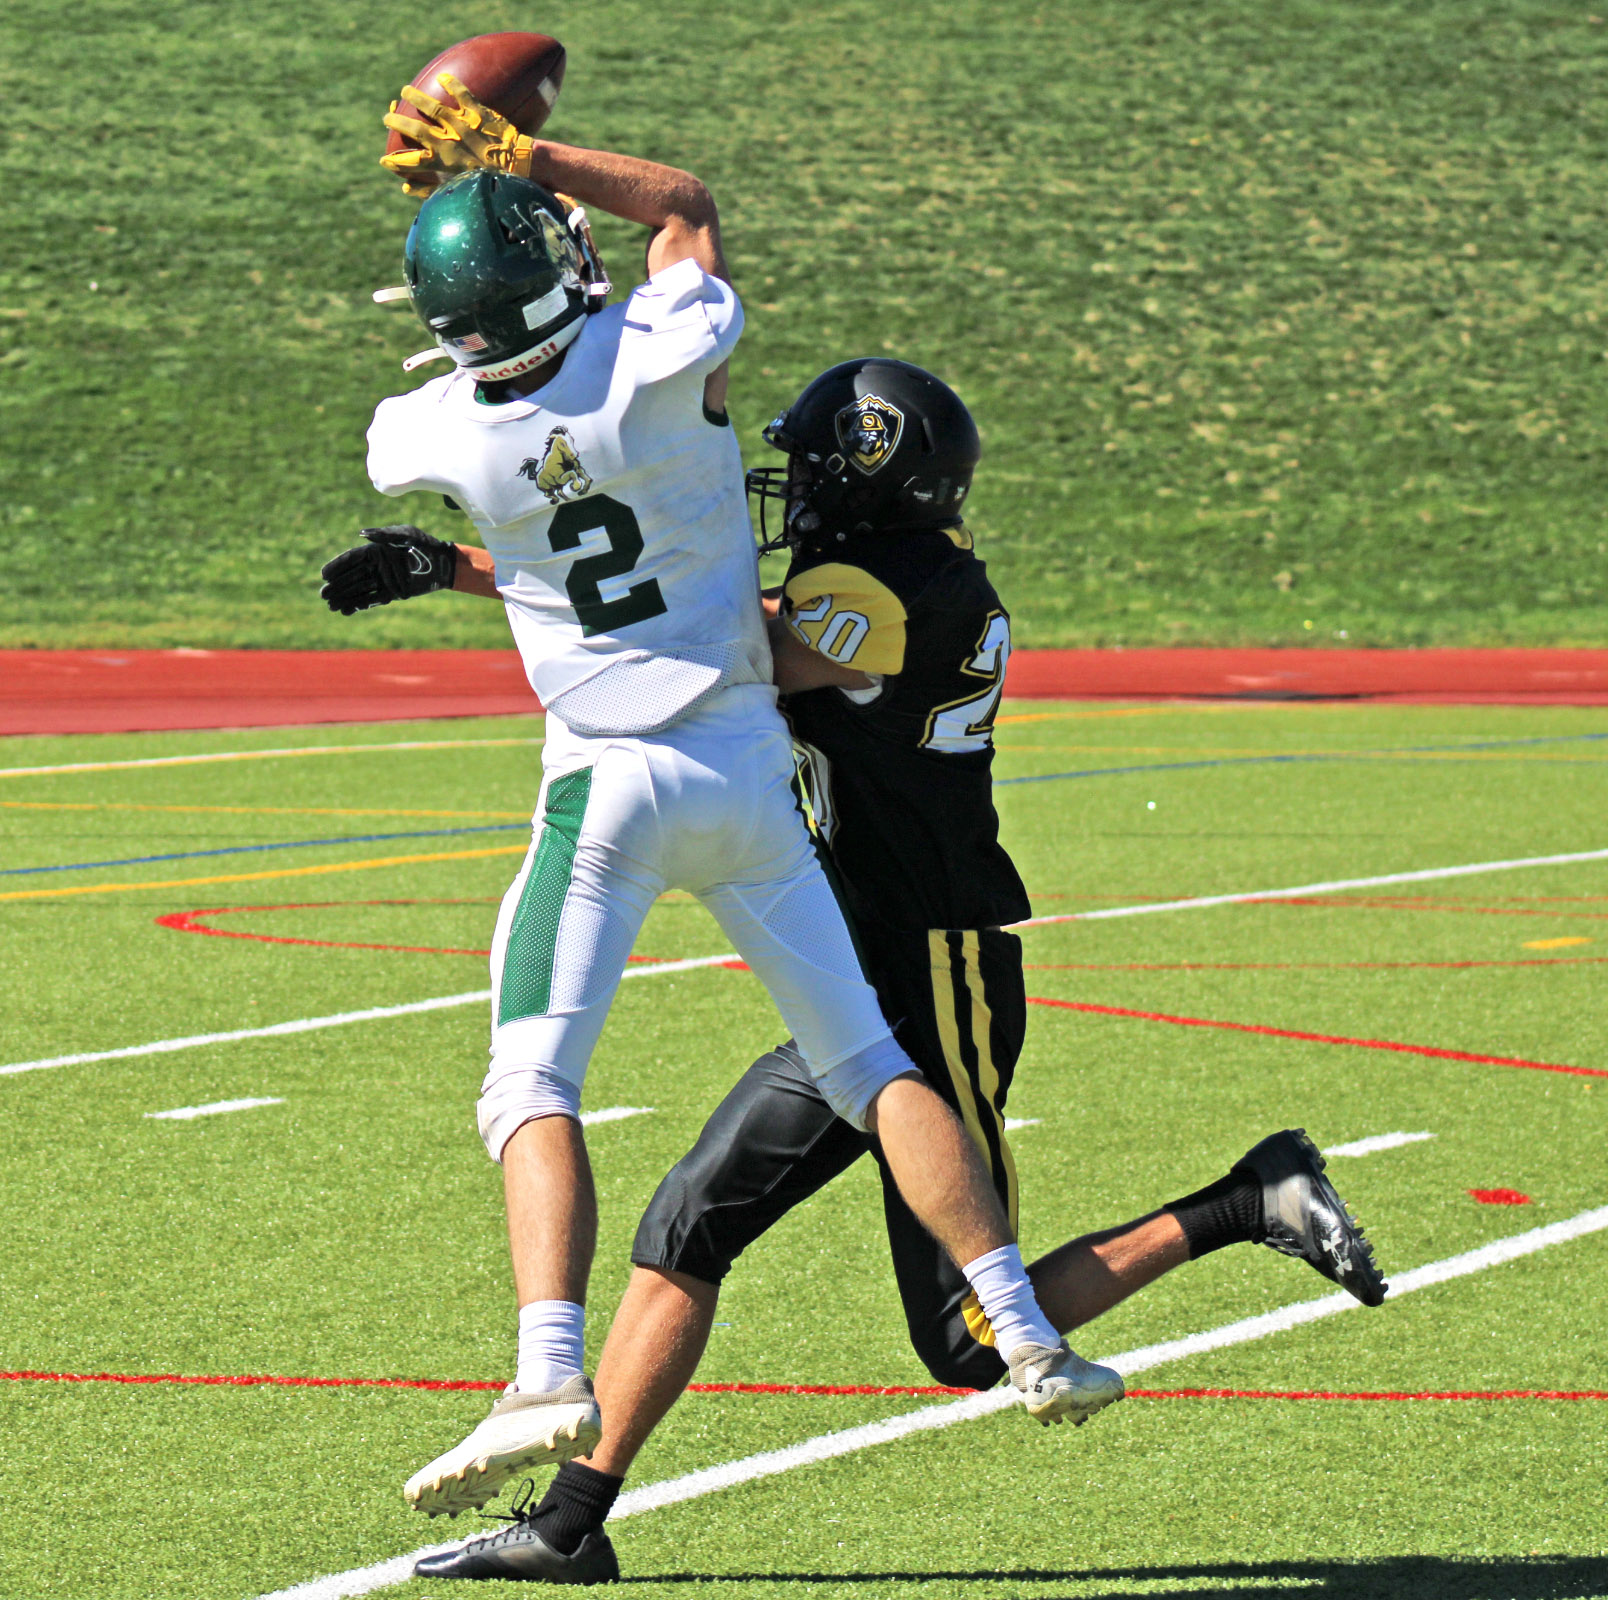 Photo by Daniel Mohrmann. Manitou Springs receiver Evan Scherr hauls in a catch in the first quarter of the Mustangs’ win over Prospect Ridge Academy.